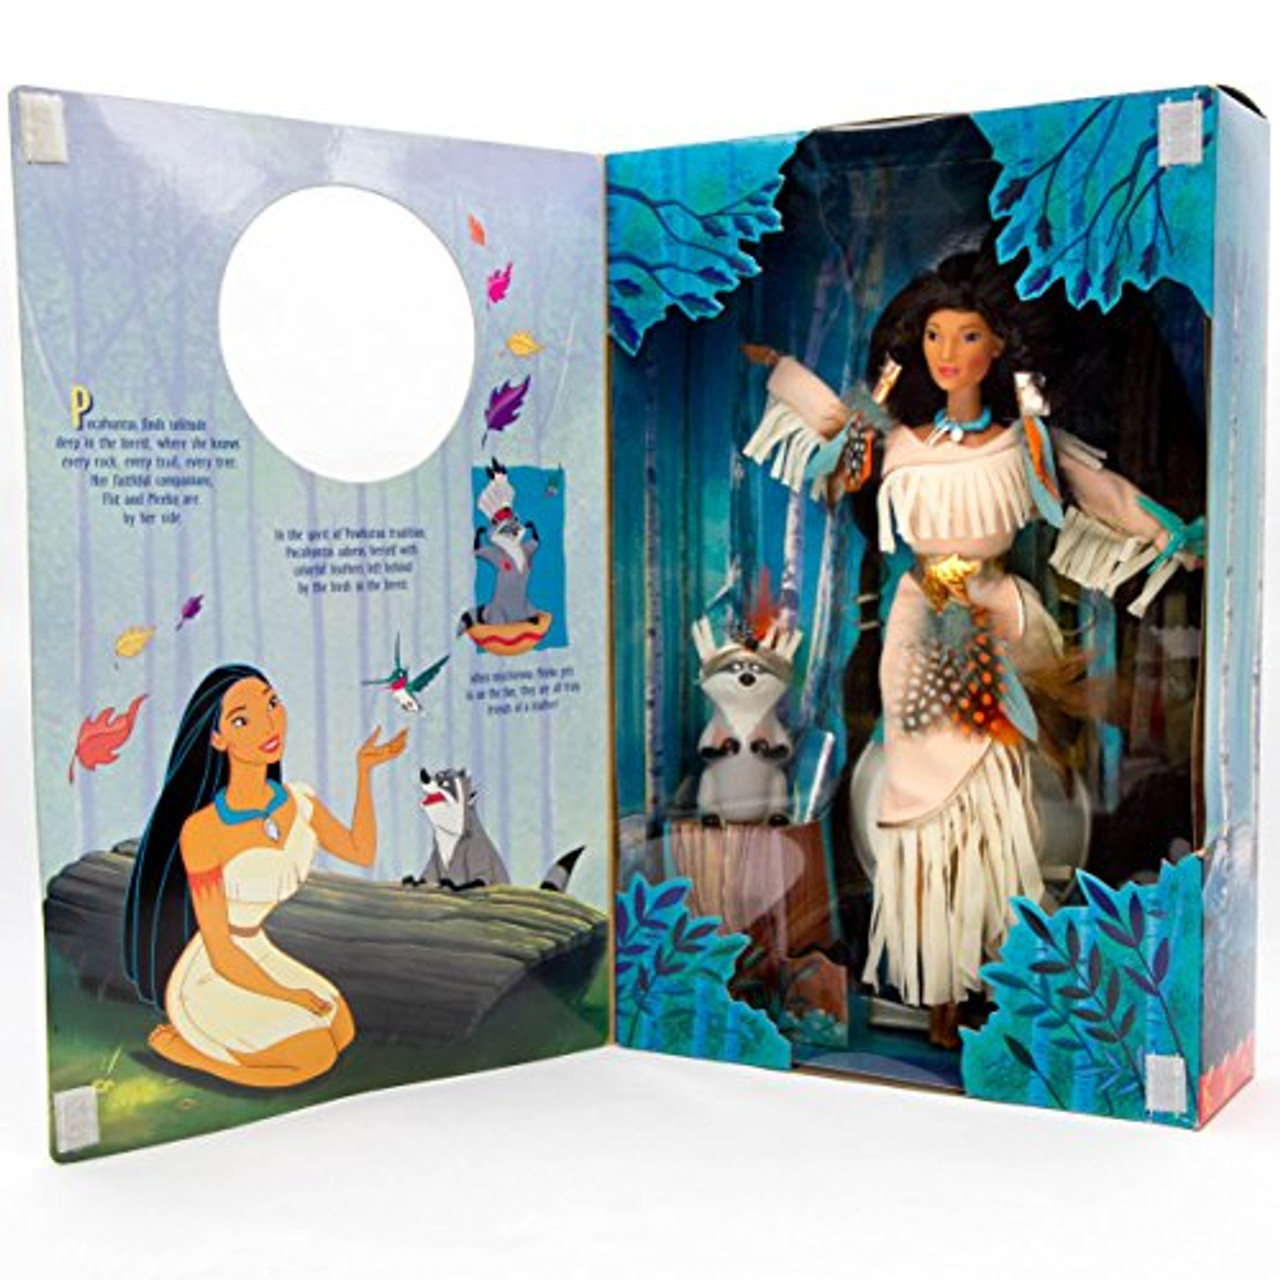 Pocahontas Feathers in the Wind Doll - We-R-Toys